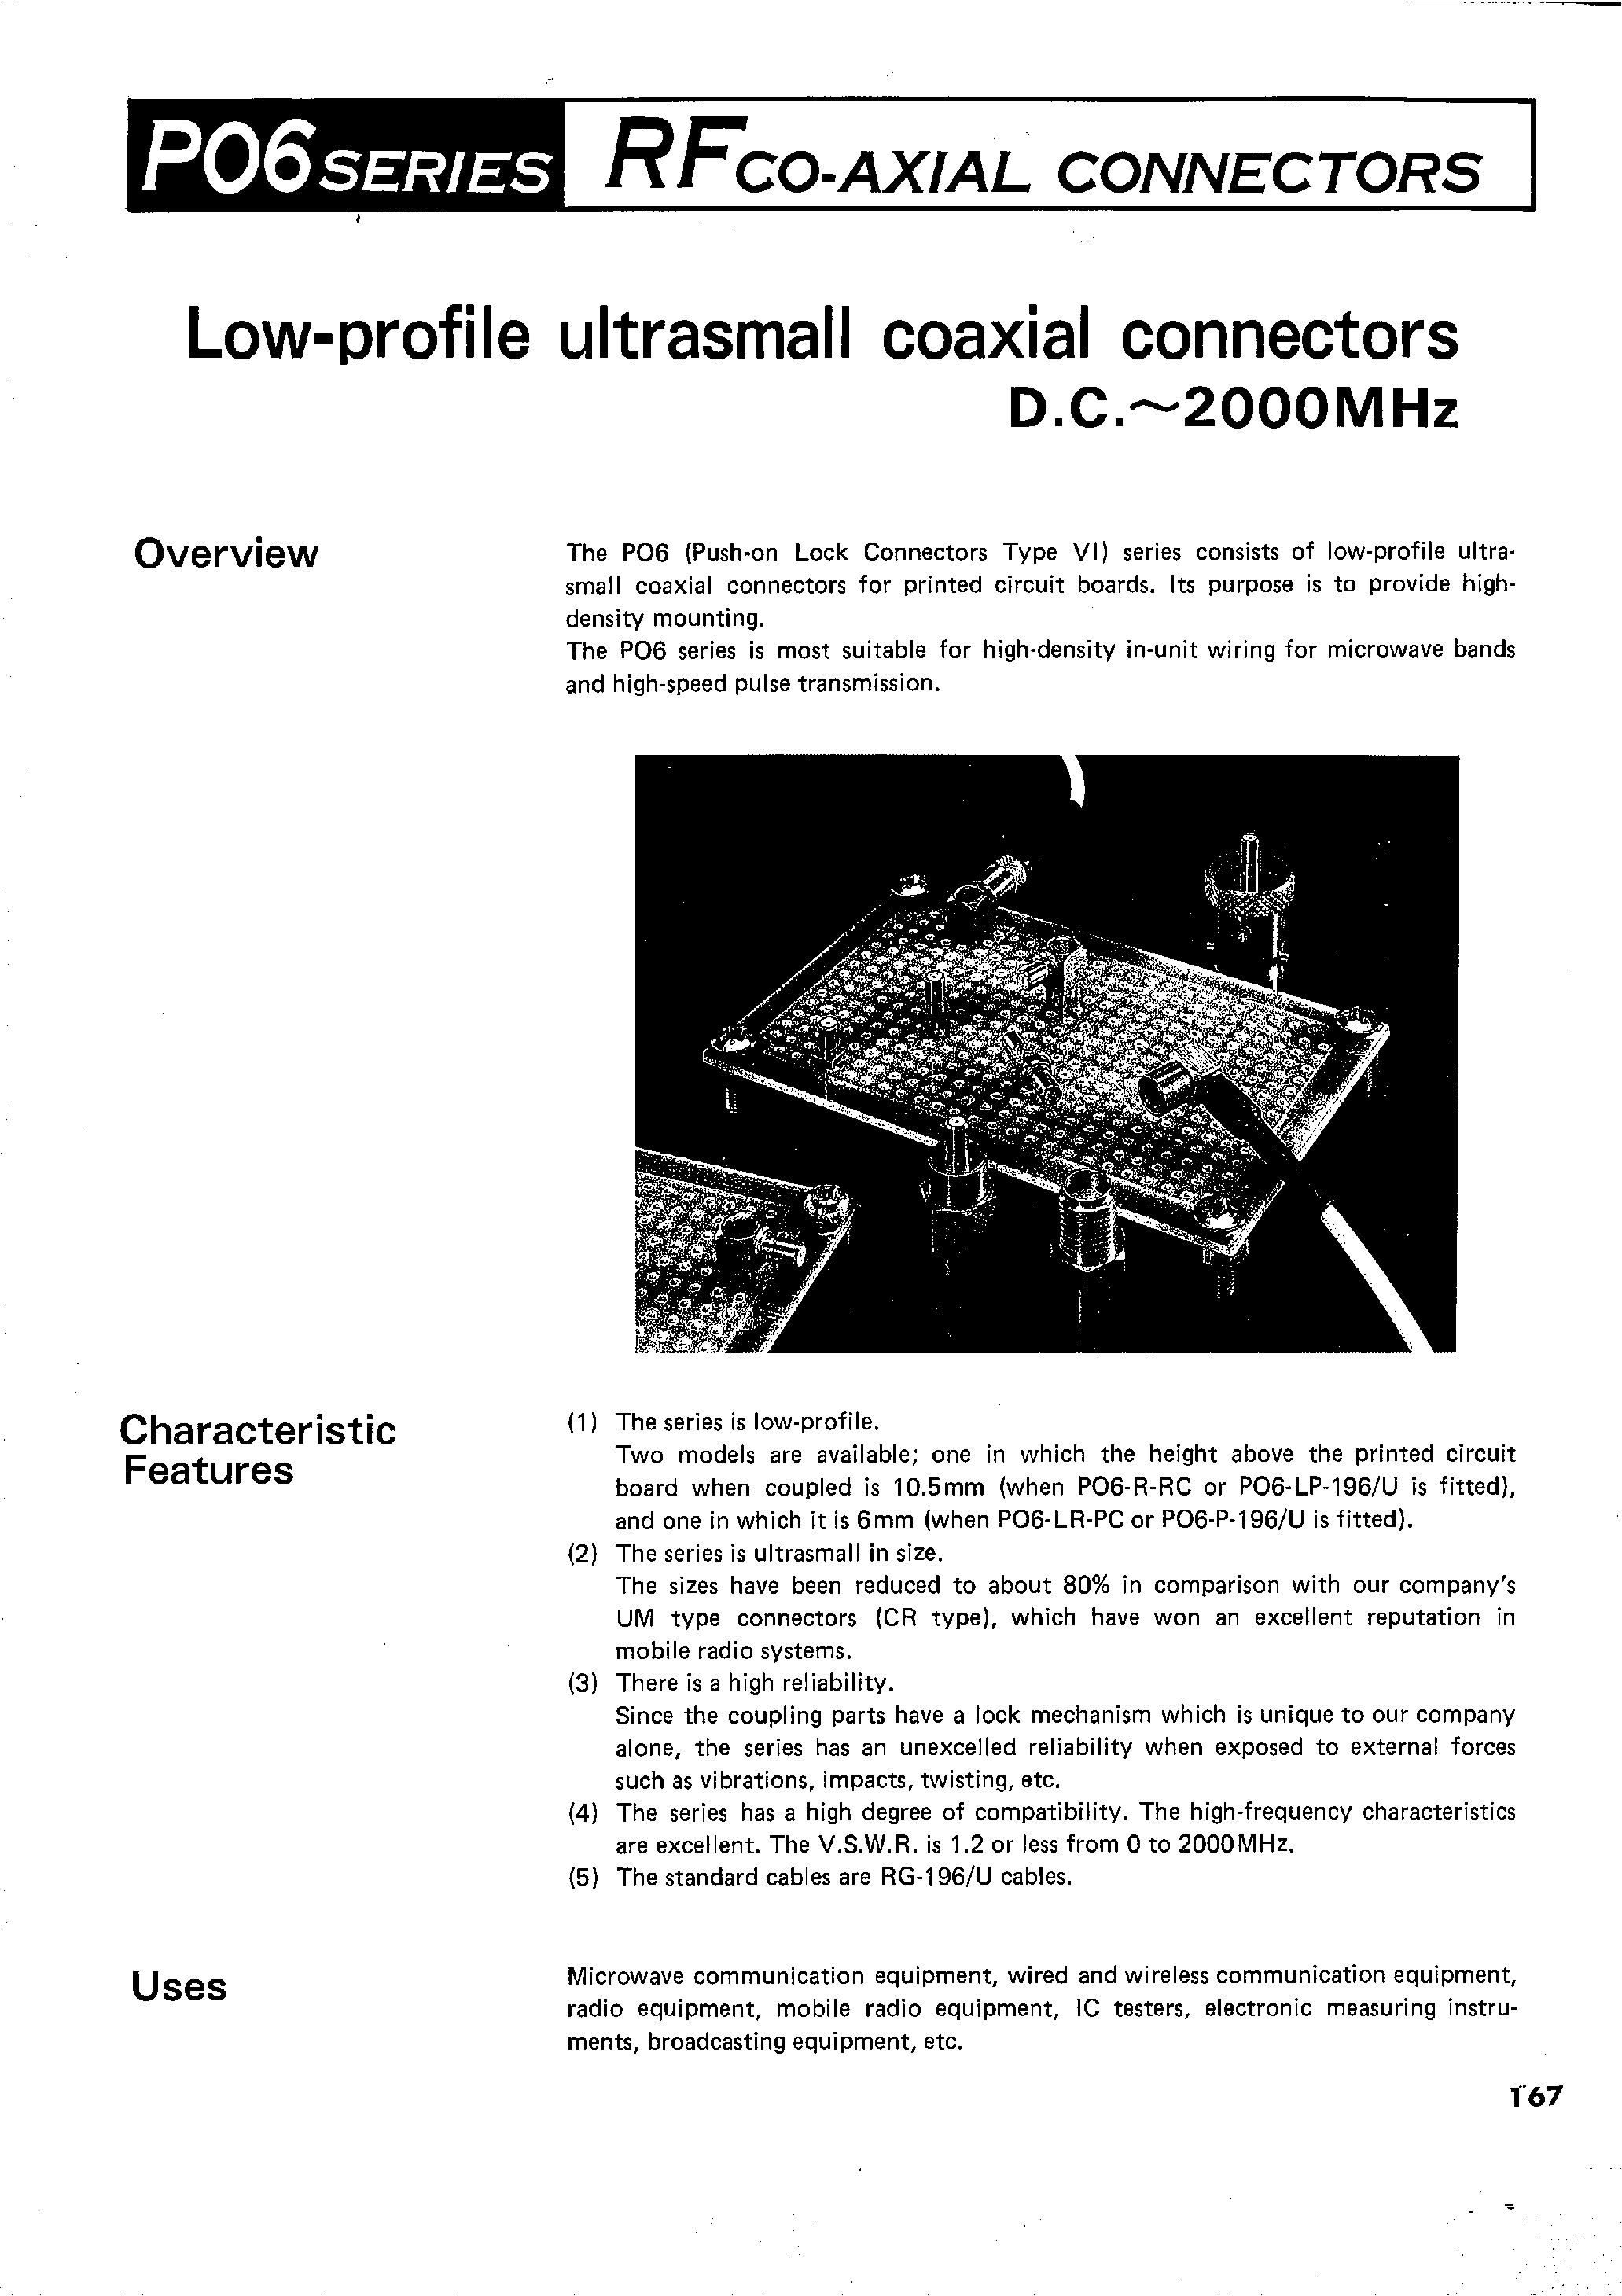 Datasheet PO6-A-JJ - RFCO-AXIAL CONNECTORS(Low-profile ultrasmall coaxial connector) page 1